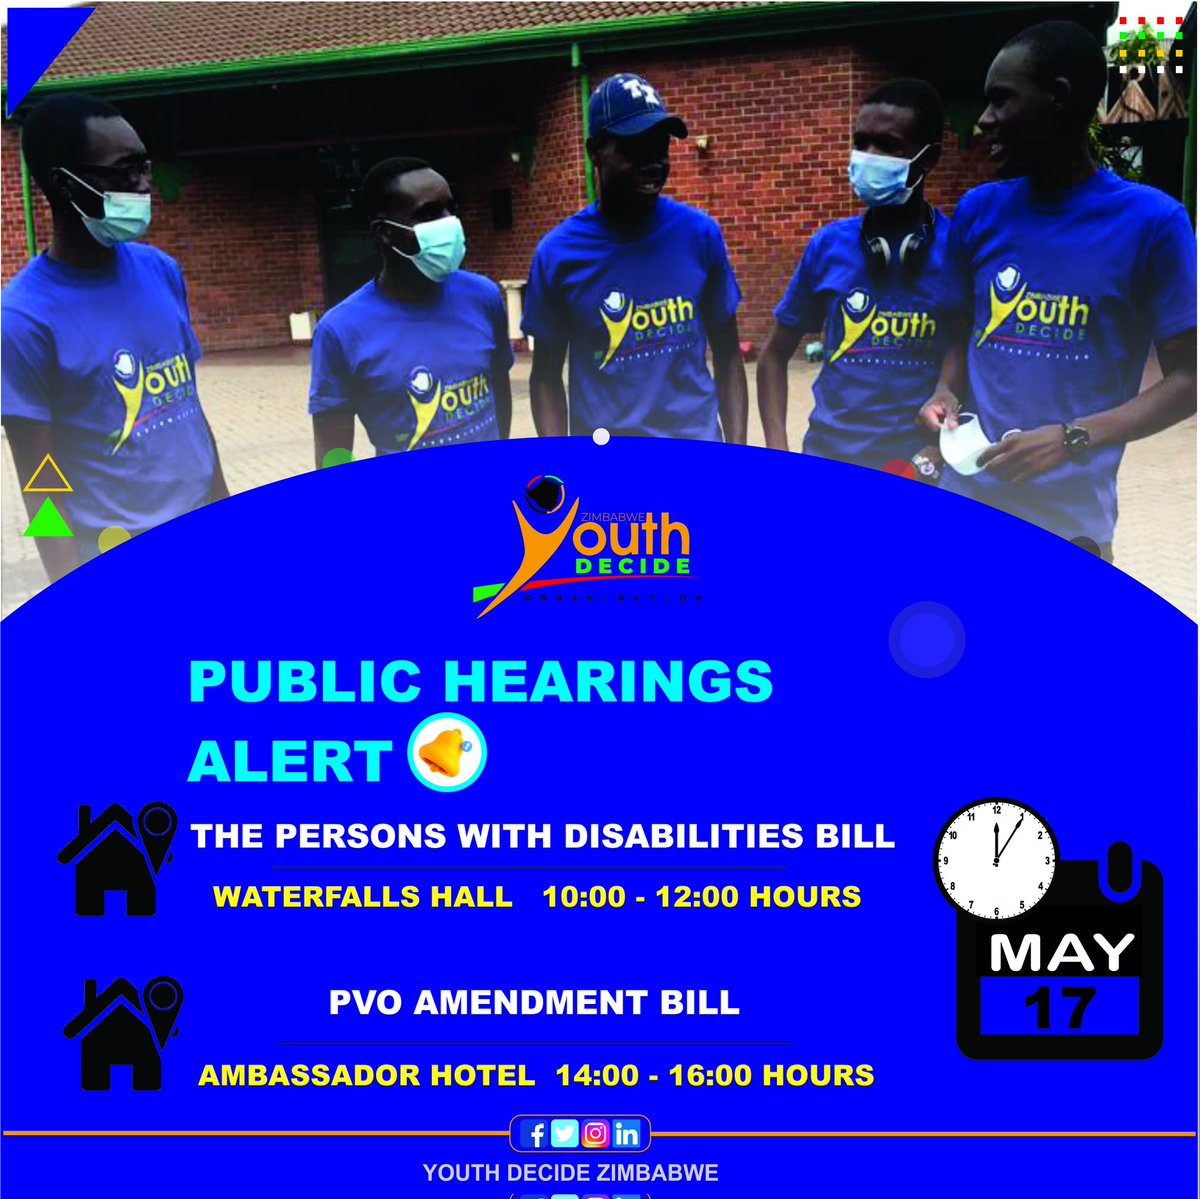 📣 Hey Young Zimbabweans! 🇿🇼 Your future is being shaped now & your voice is the blueprint. Join the public hearings on May 17 and be the architects of change! 🏛️✍️ #ShapeYourFuture #YouthDecide #PVOBill #DisabilityBill #BeHeard